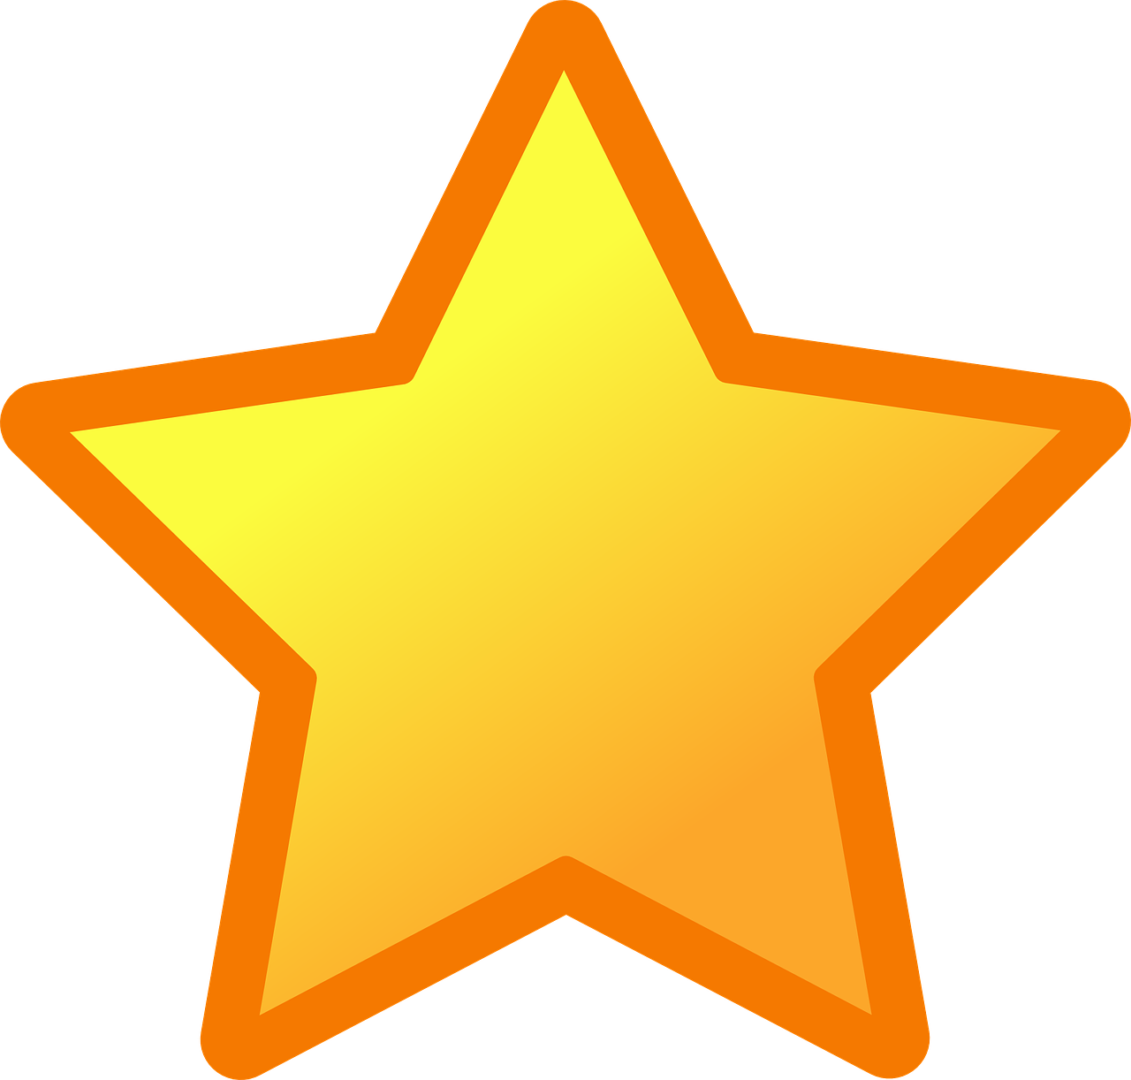 A yellow star with green background